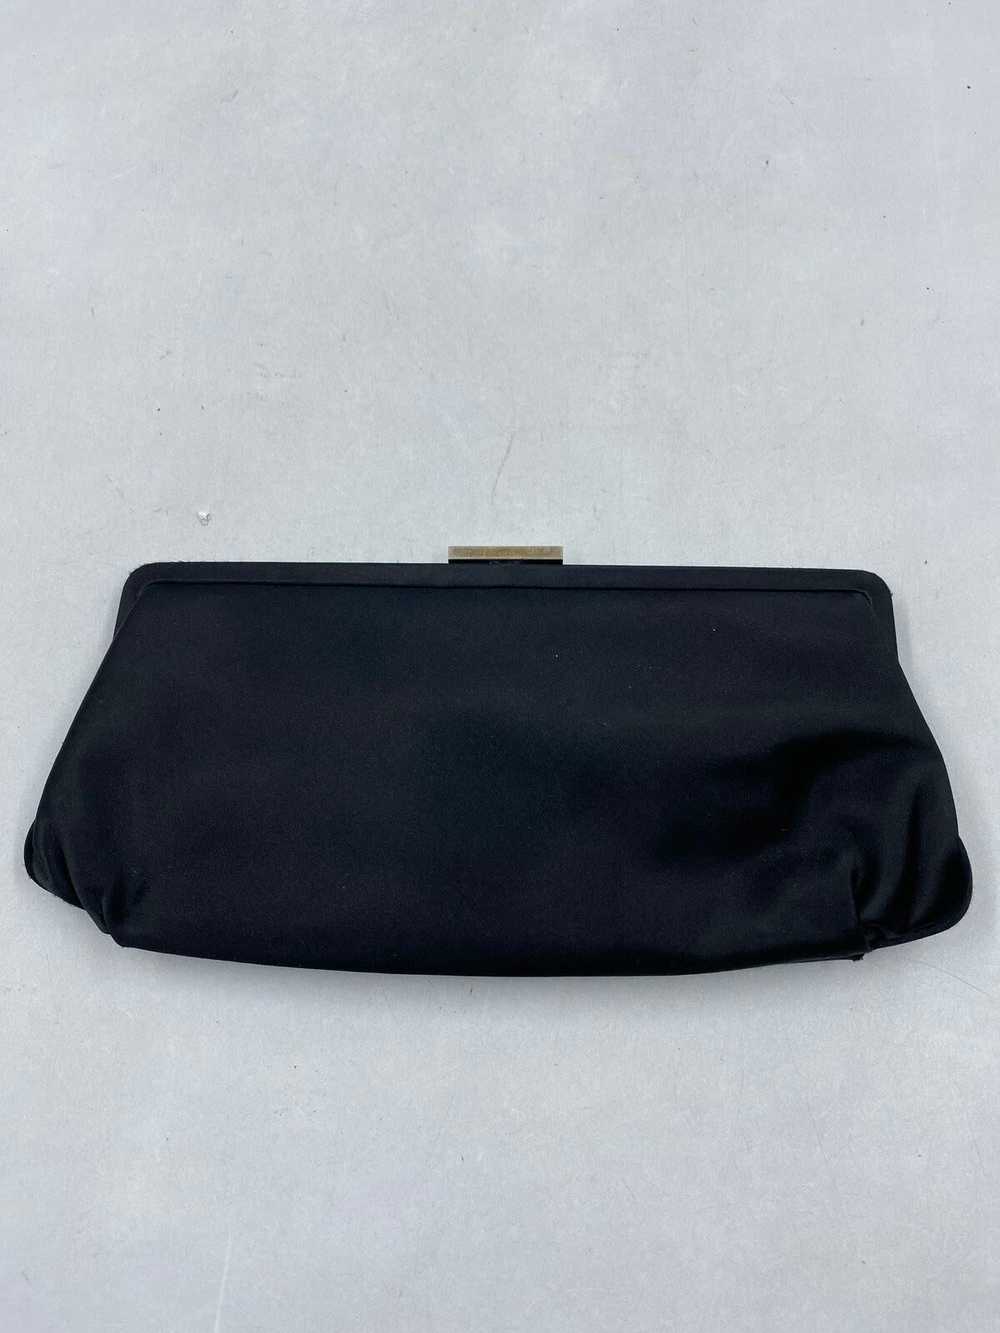 Authentic Tiffany & Co. Satin Clutch - image 1